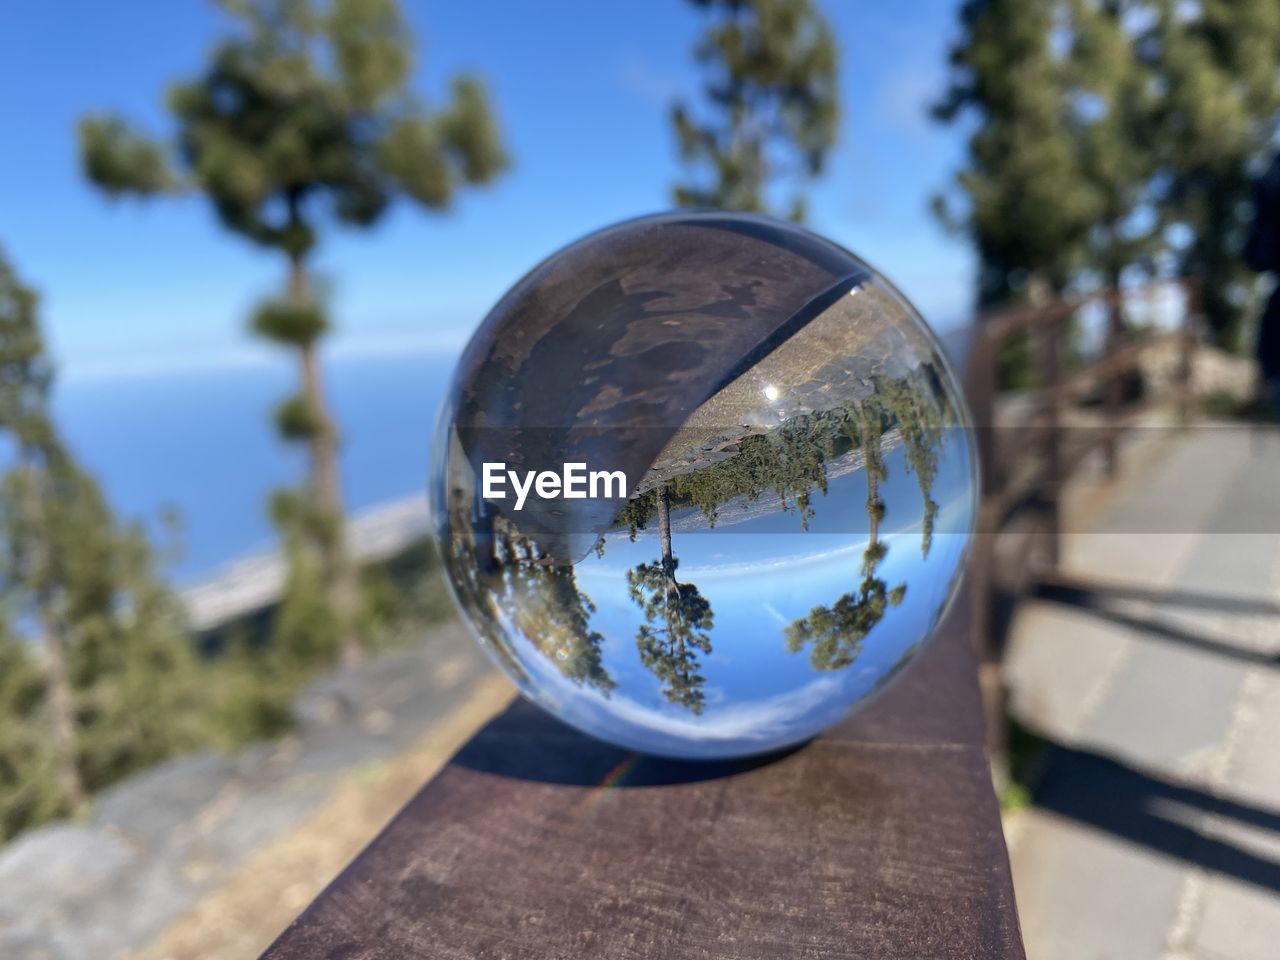 blue, nature, sphere, reflection, tree, focus on foreground, sky, plant, day, shape, no people, outdoors, sunlight, close-up, glass, geometric shape, water, globe - man made object, transparent, circle, environment, shadow, city, clear sky, travel destinations, architecture, sunny, travel, land, crystal ball, planet earth, single object